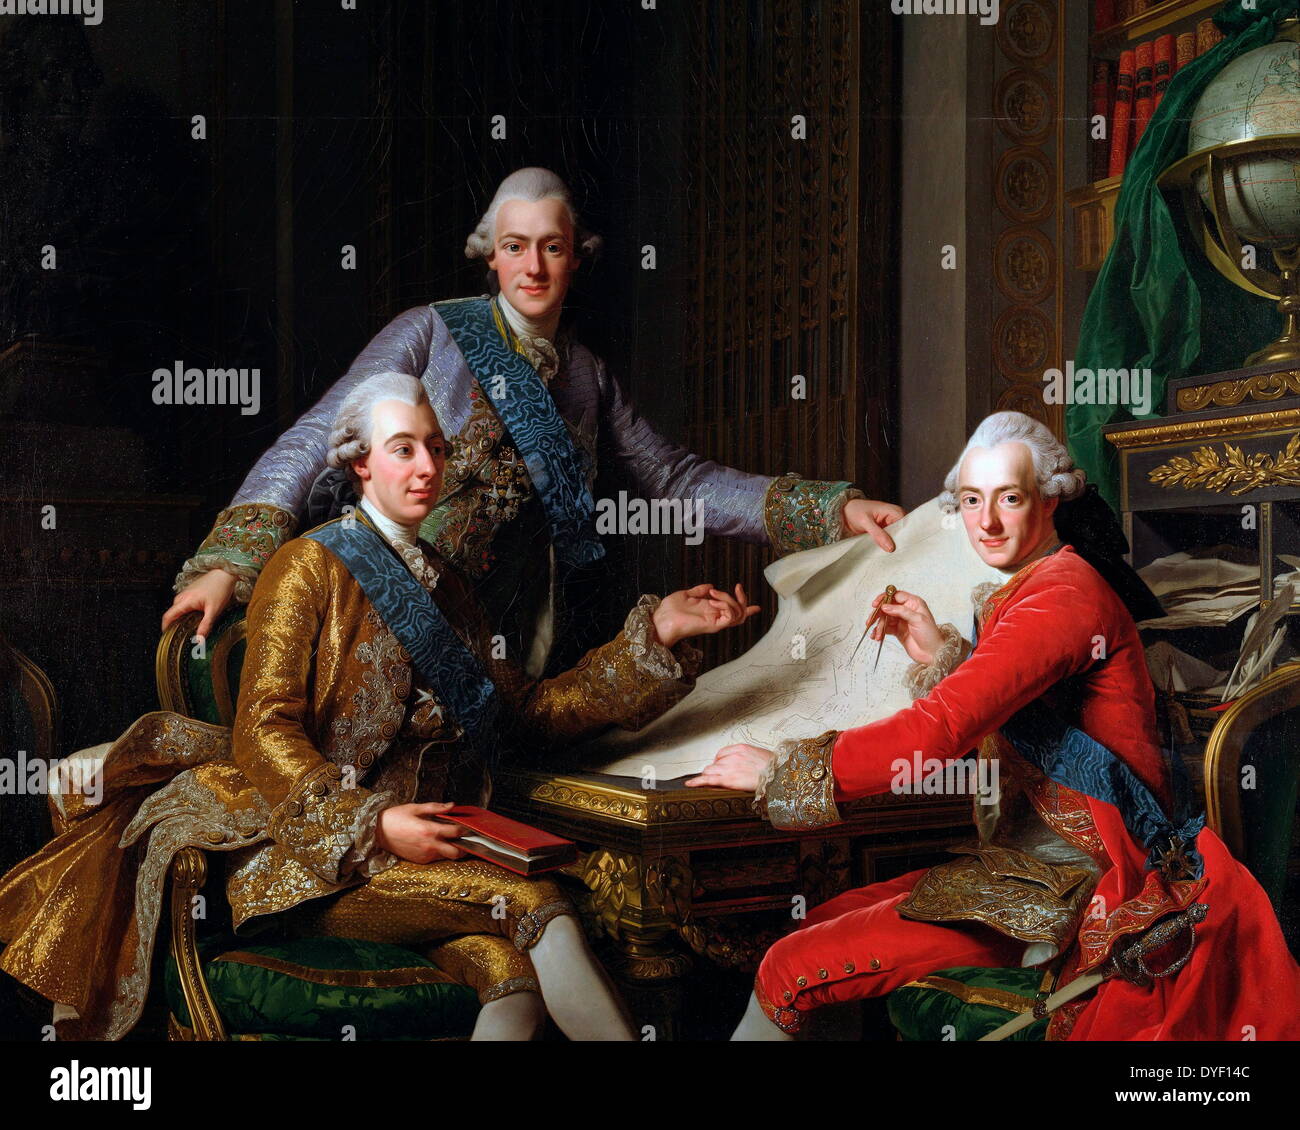 Painting by Alexander Roslin of Gustav III (left) and his two brothers, Prince Fredrik Adolf and Prince Charles, later Charles XIII of Sweden. Oil on Canvas. Circa late 18th century. Stock Photo